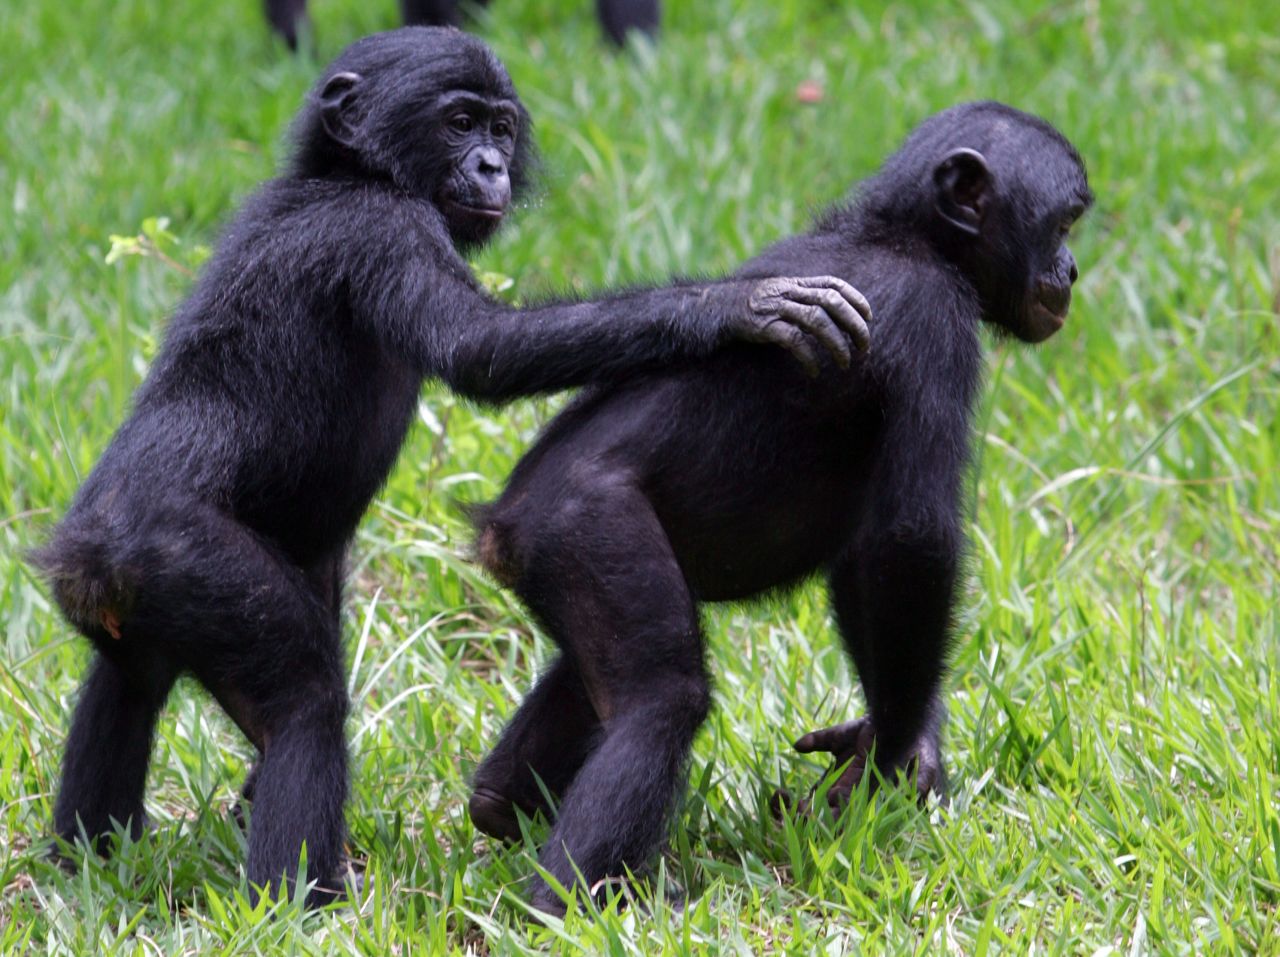 The bonobo is an endangered ape found only in the Democratic Republic of Congo.